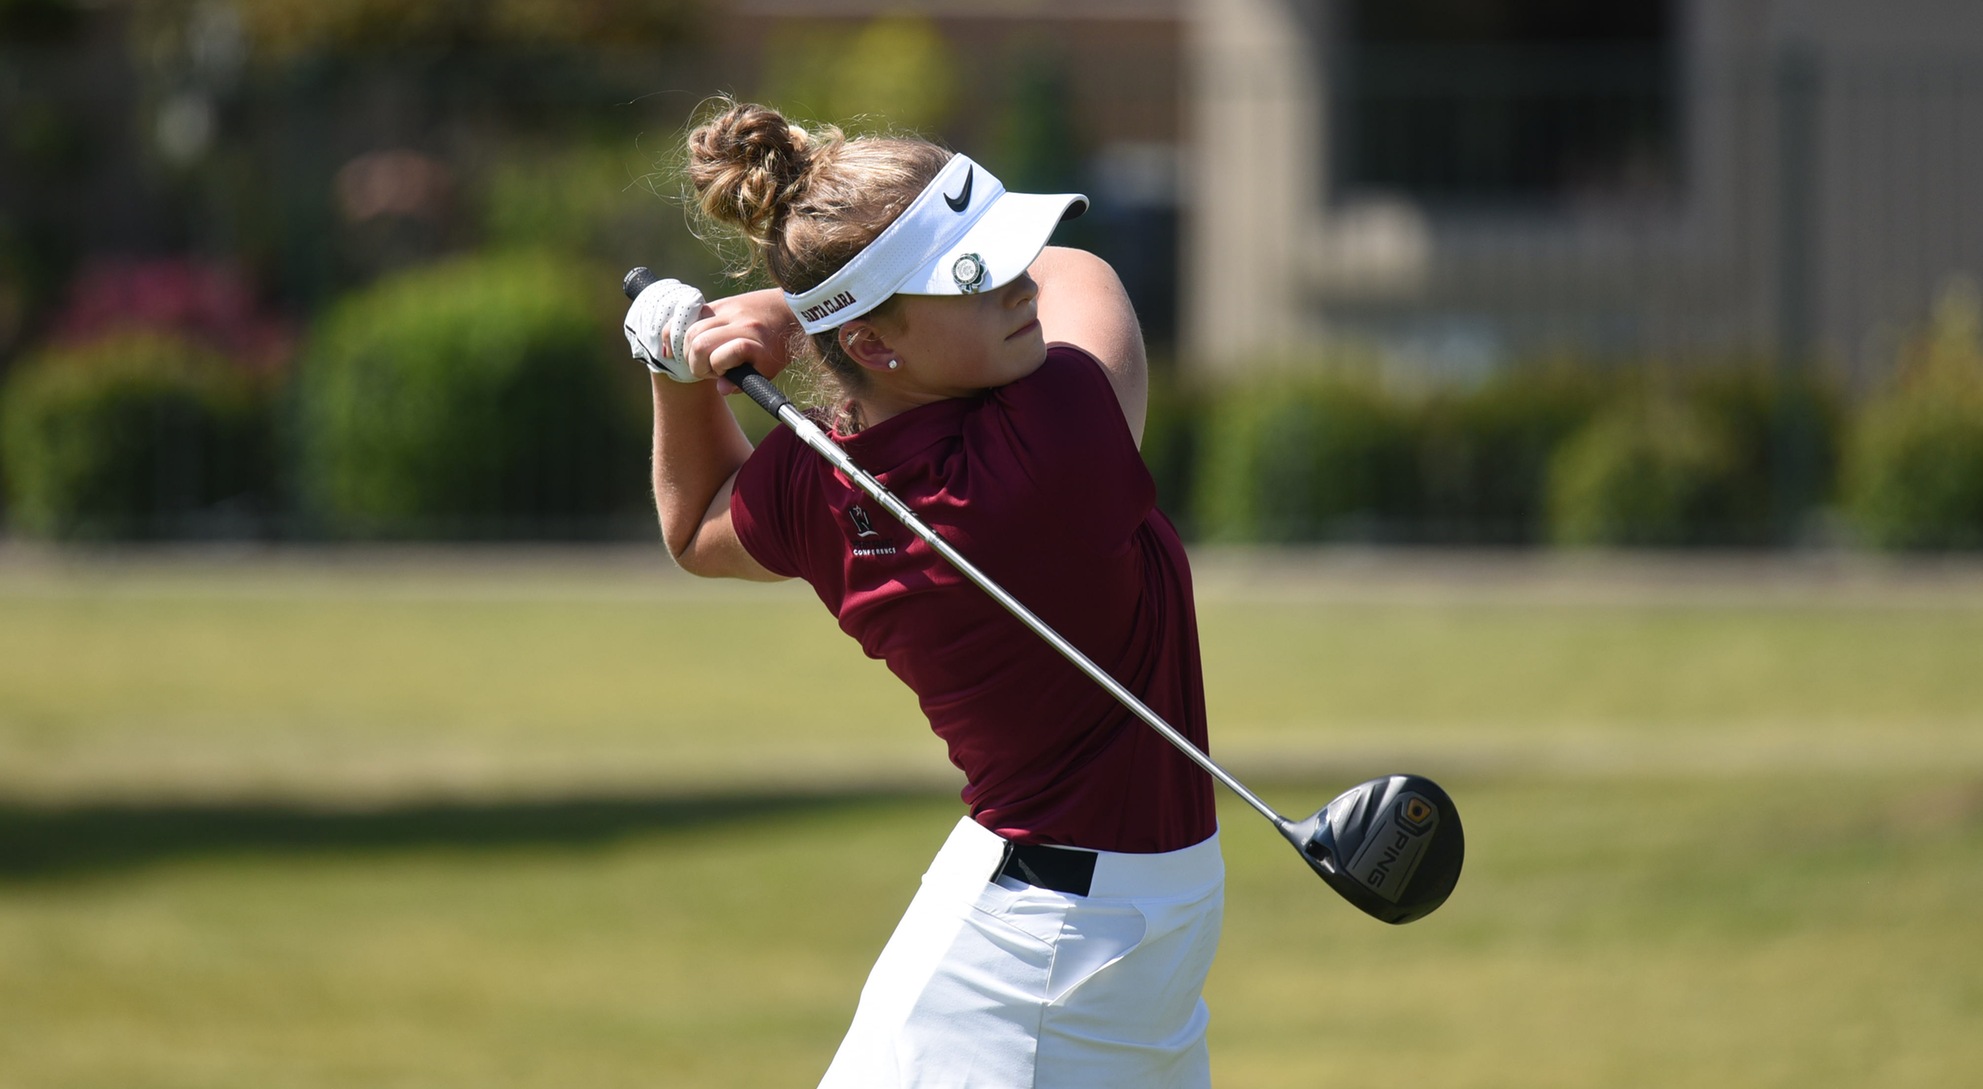 Women’s Golf Tied For Sixth After 36 Holes Of BYU at Entrada Classic